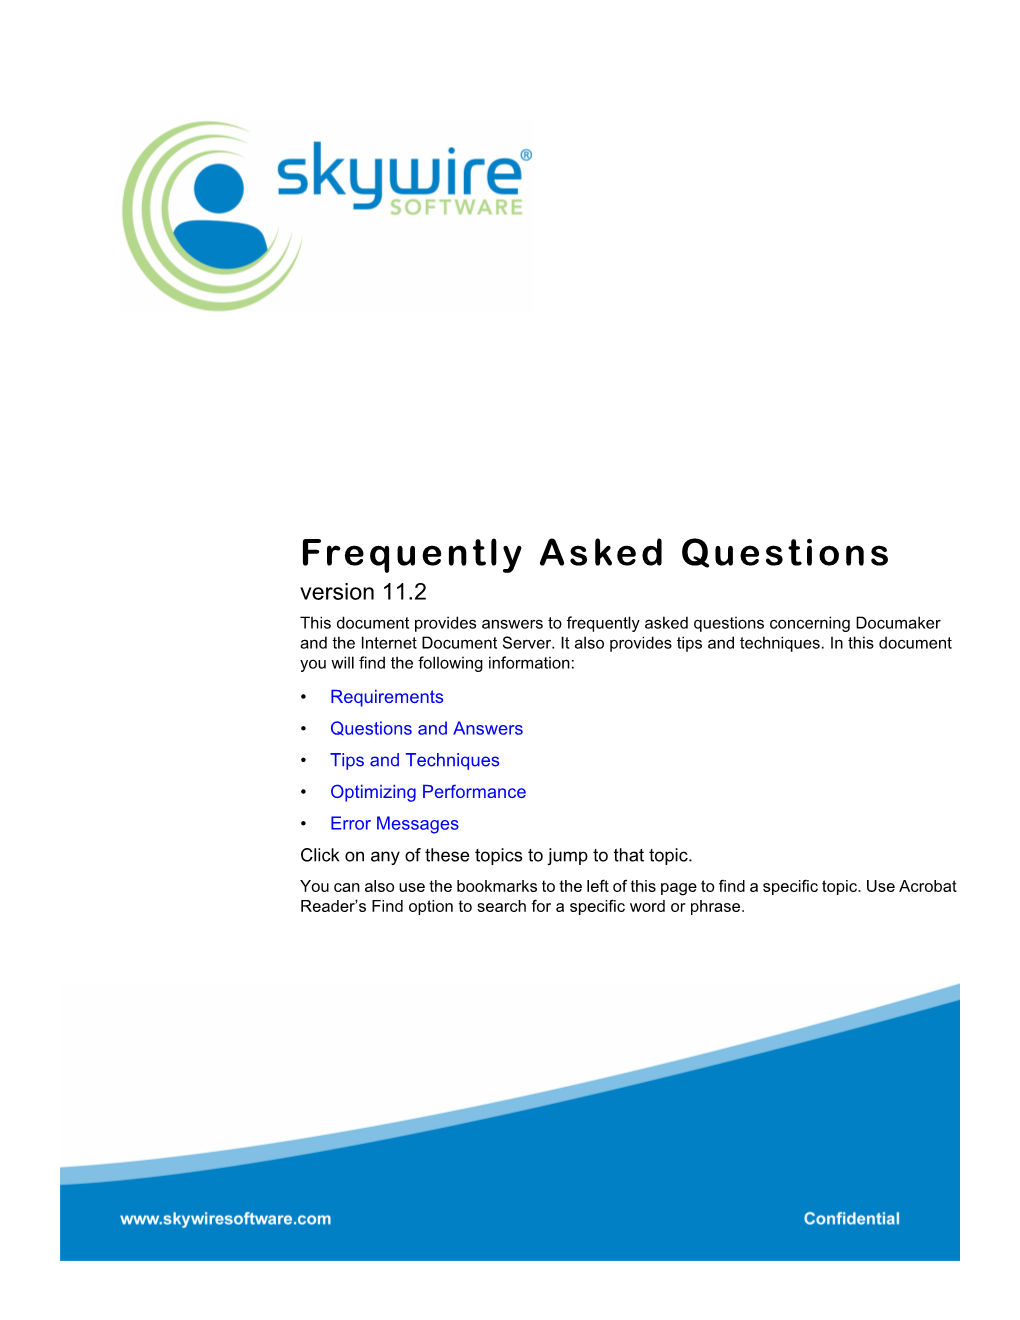 Frequently Asked Questions Version 11.2 This Document Provides Answers to Frequently Asked Questions Concerning Documaker and the Internet Document Server